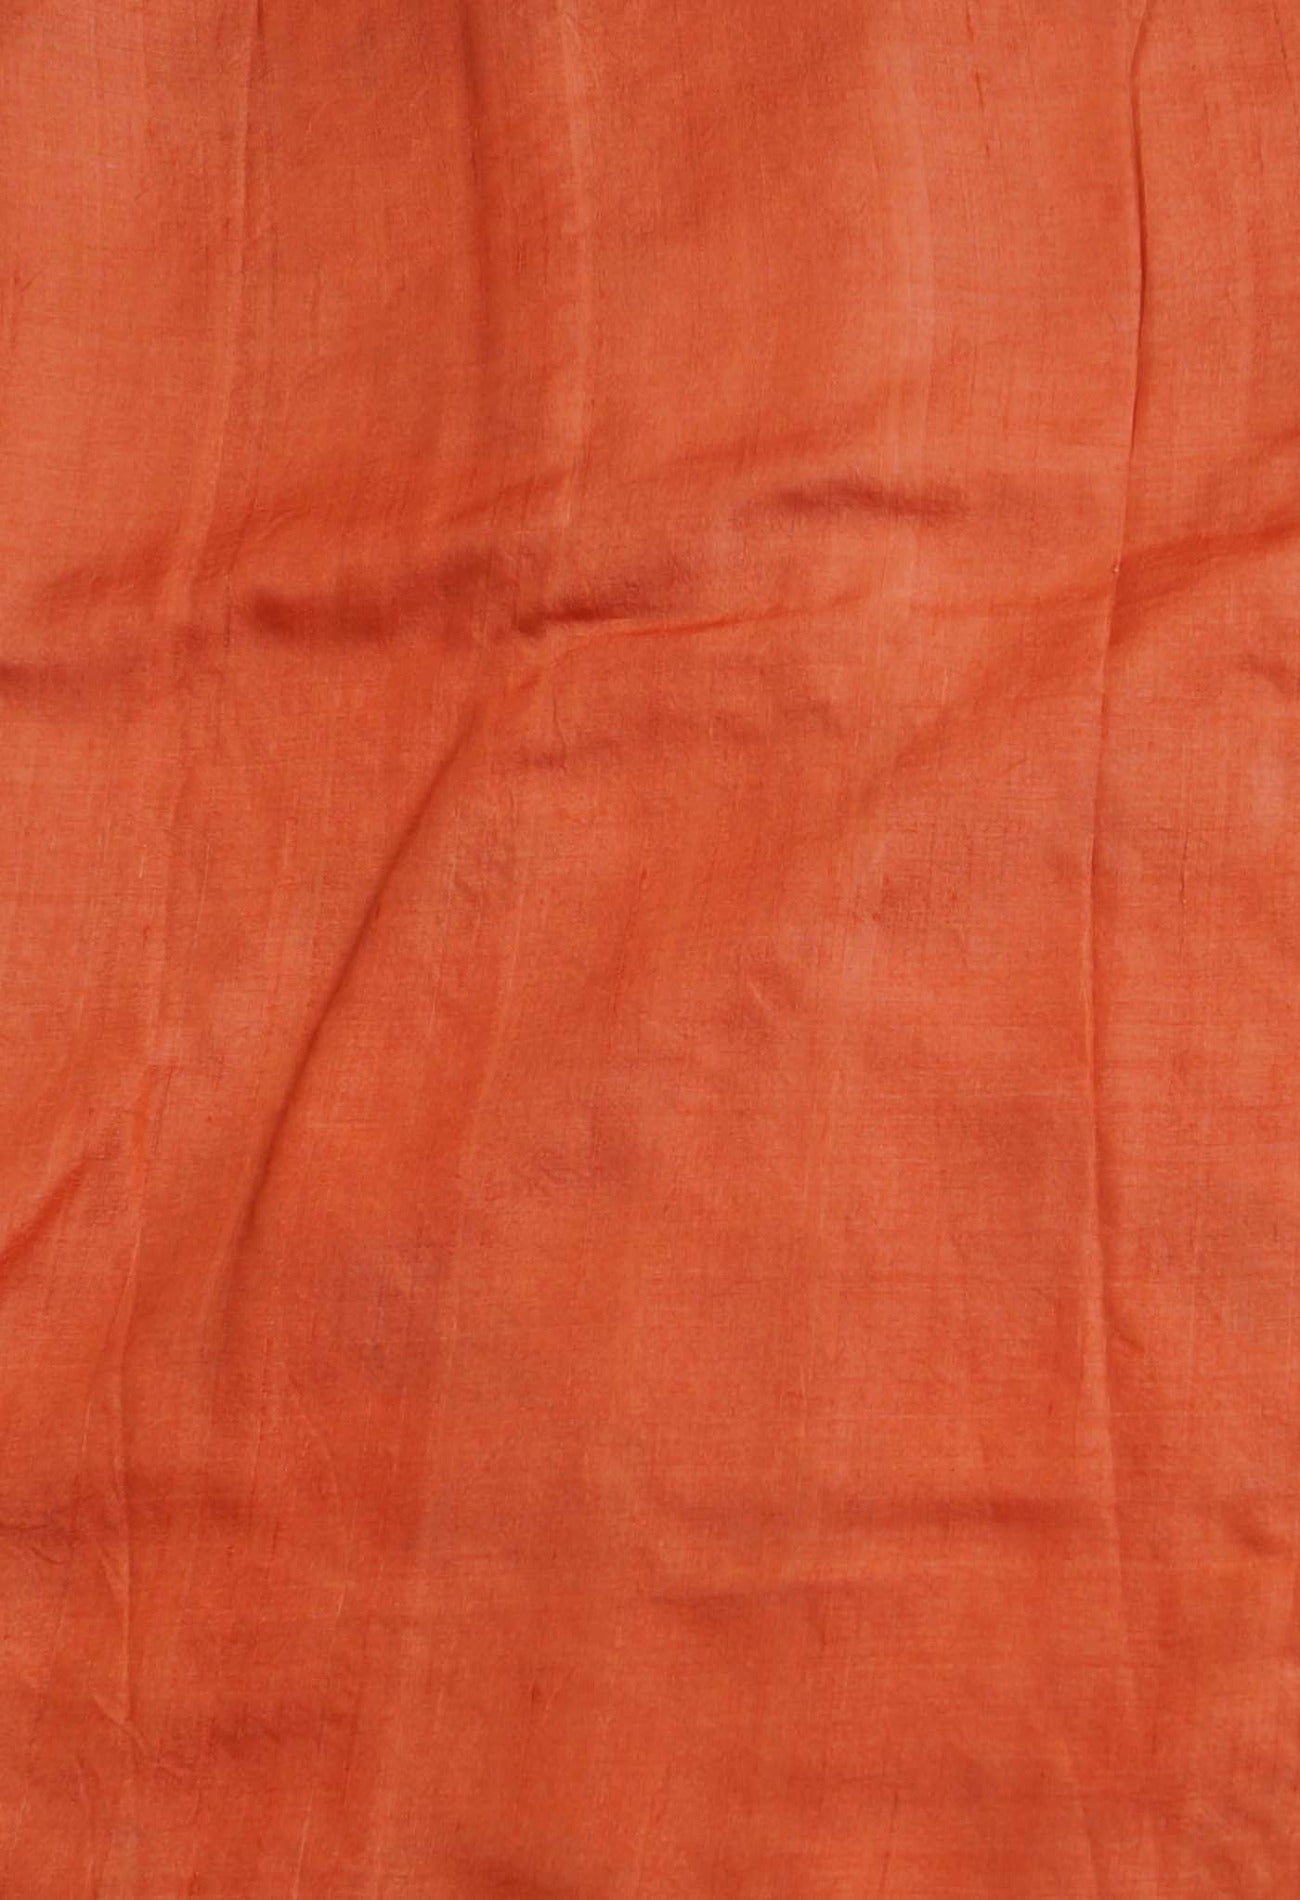 Online Shopping for Red Pure Handloom Bengal Tussar Silk Saree with Hand Block Prints from West Bengal at Unnatisilks.comIndia
